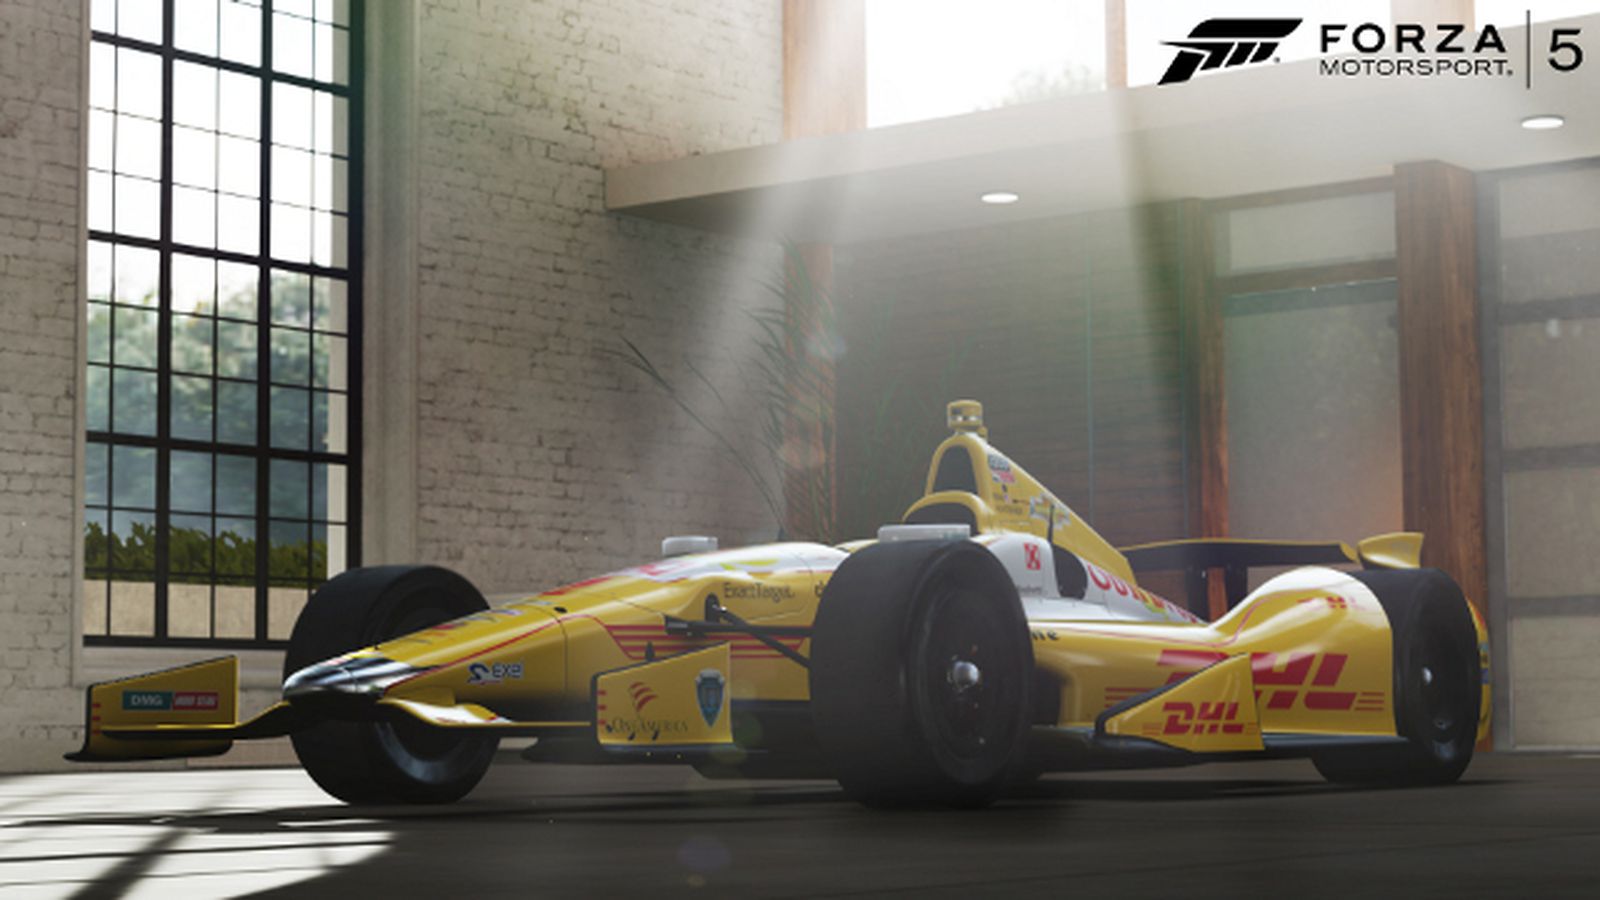 IndyCar Series to be featured in Forza 5 video game - SBNation.com